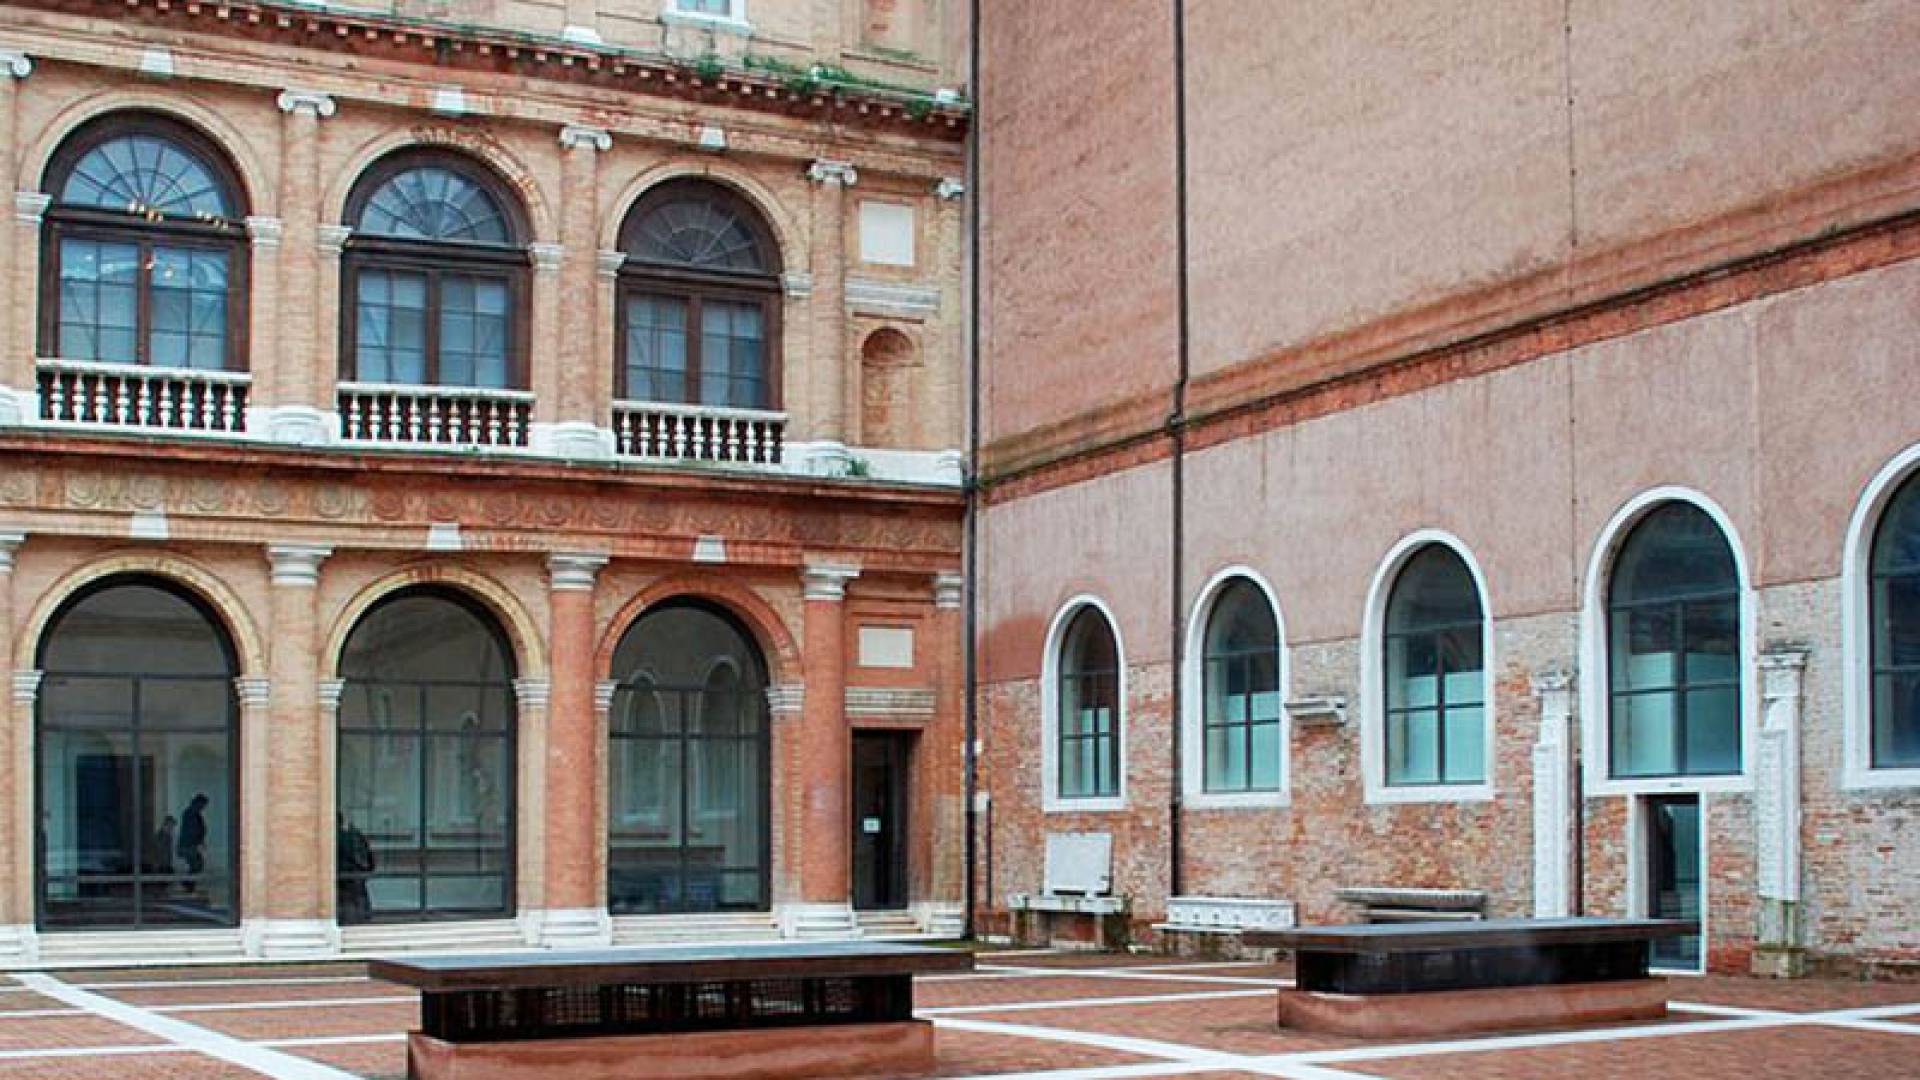 ACCADEMIA GALLERY, History